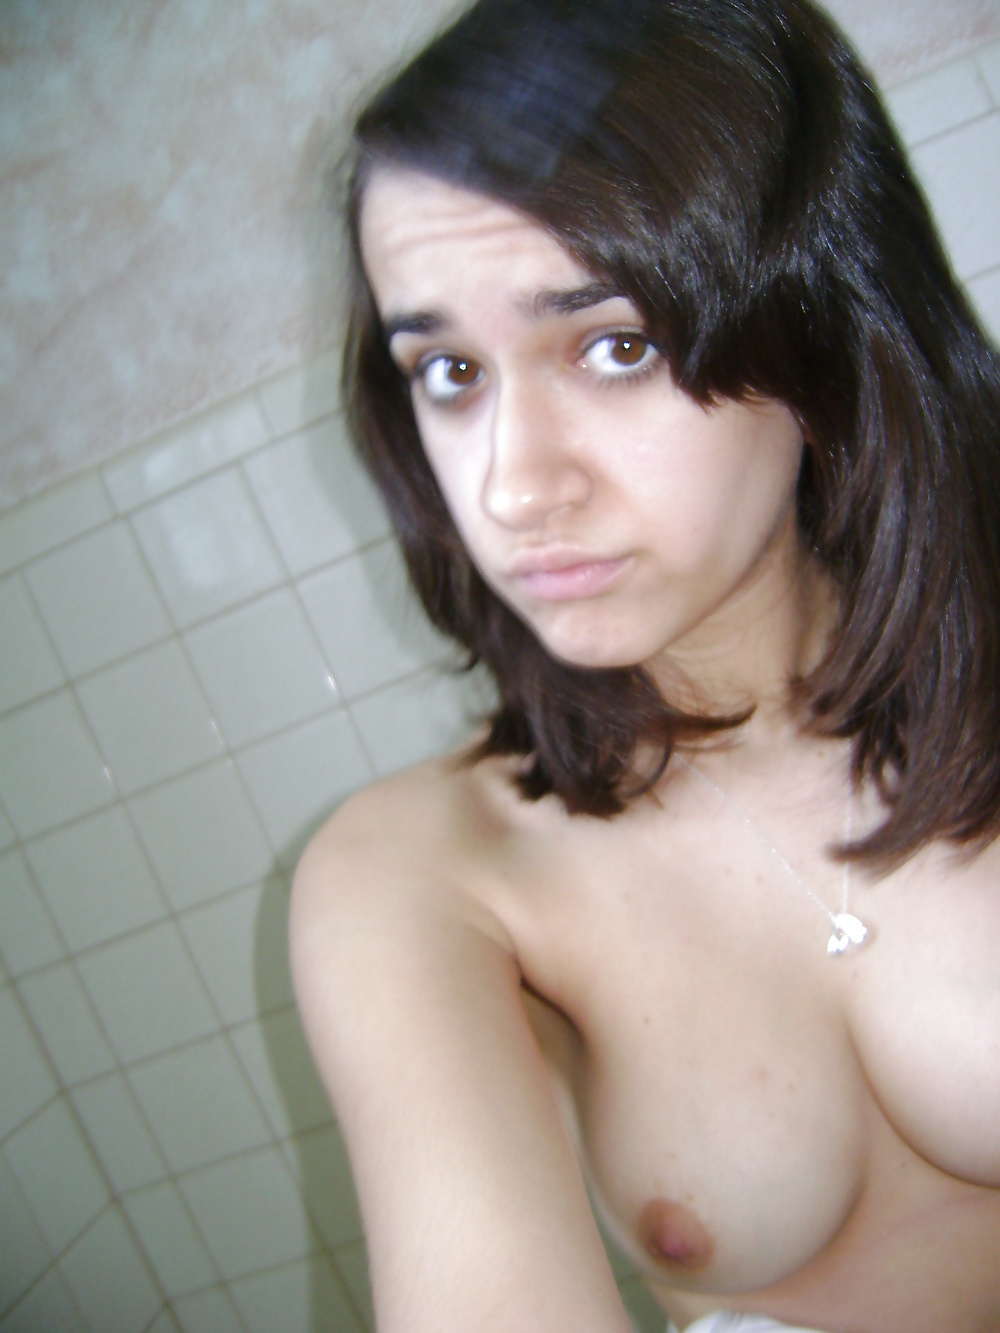 Piccole troie teenager sexy
 #31770496